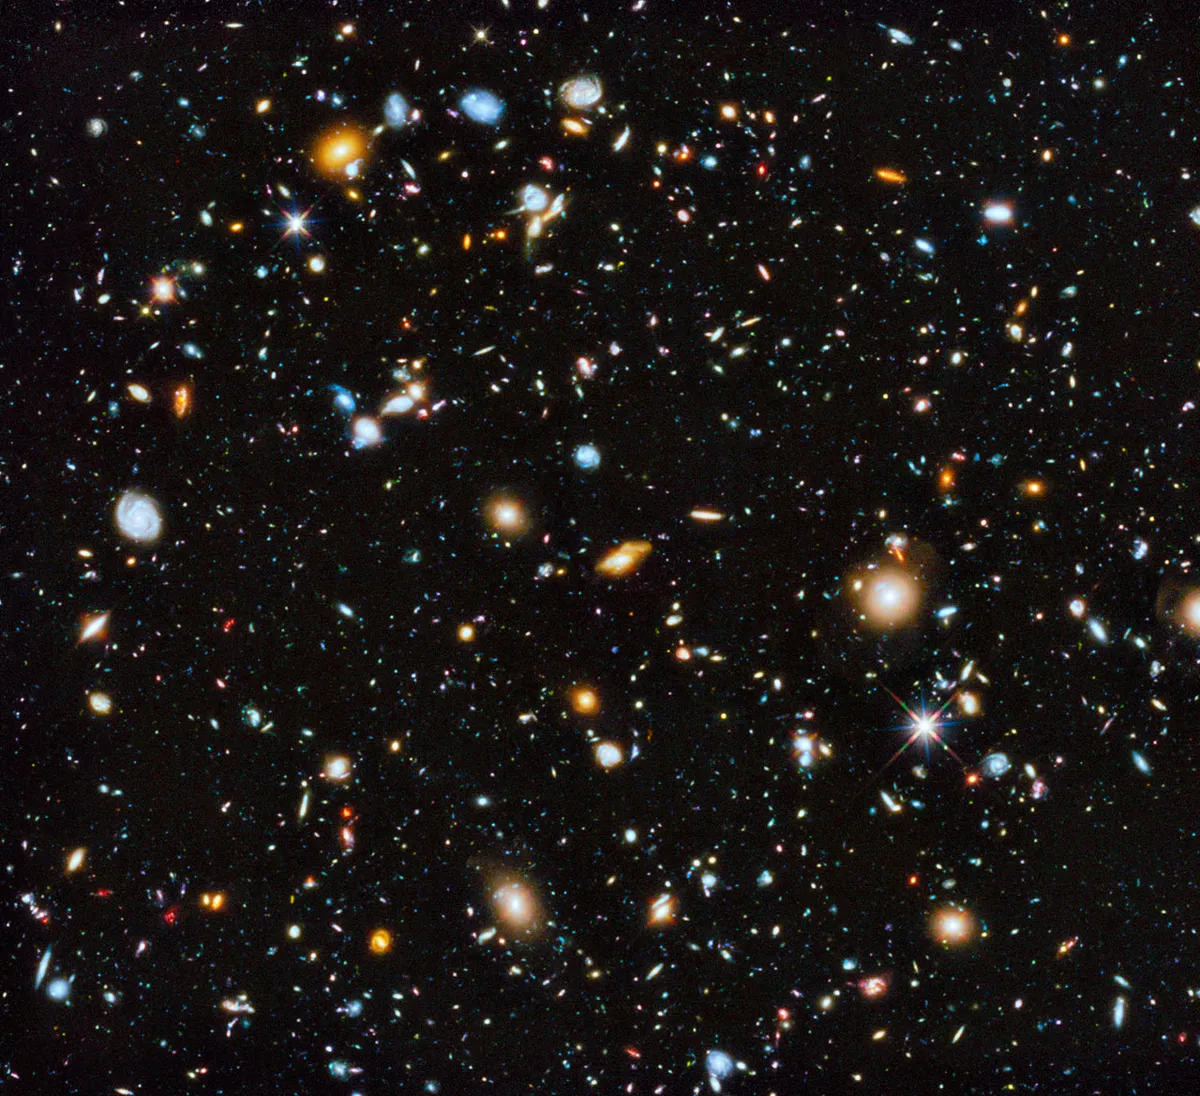 Hubble Ultra-Deep Field 3 June 2014 Virtually every point of light in this image is a galaxy, each composed of billions of stars. Credit: NASA, ESA, H. Teplitz and M. Rafelski (IPAC/Caltech), A. Koekemoer (STScI), R. Windhorst (Arizona State University), Z. Levay (STScI)